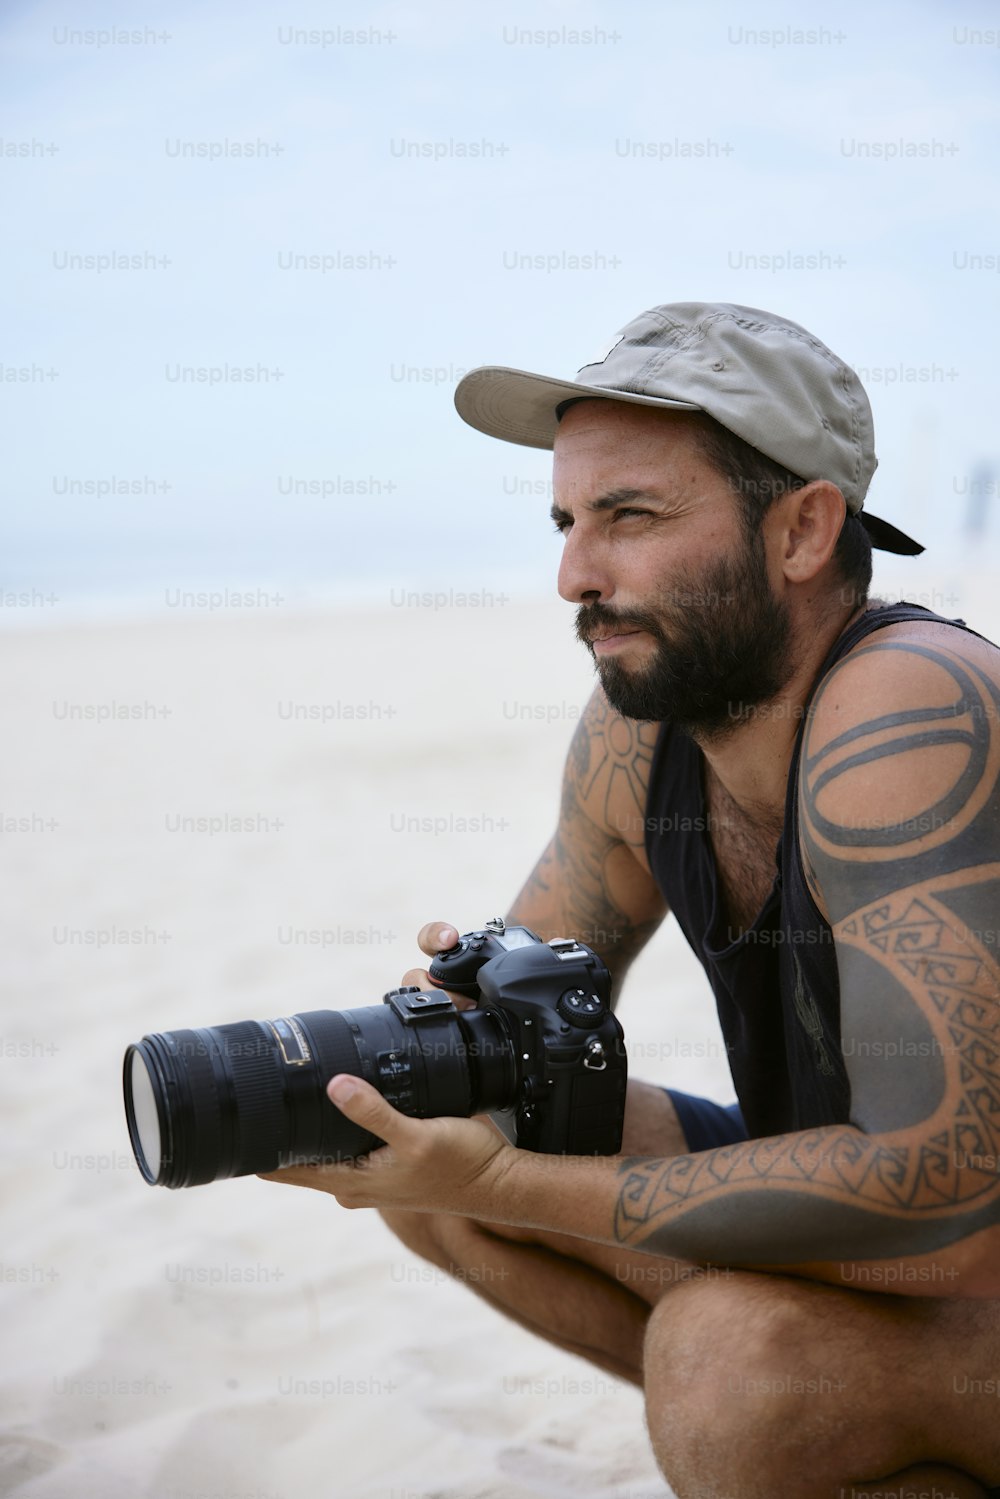 a man with a tattoo on his arm holding a camera